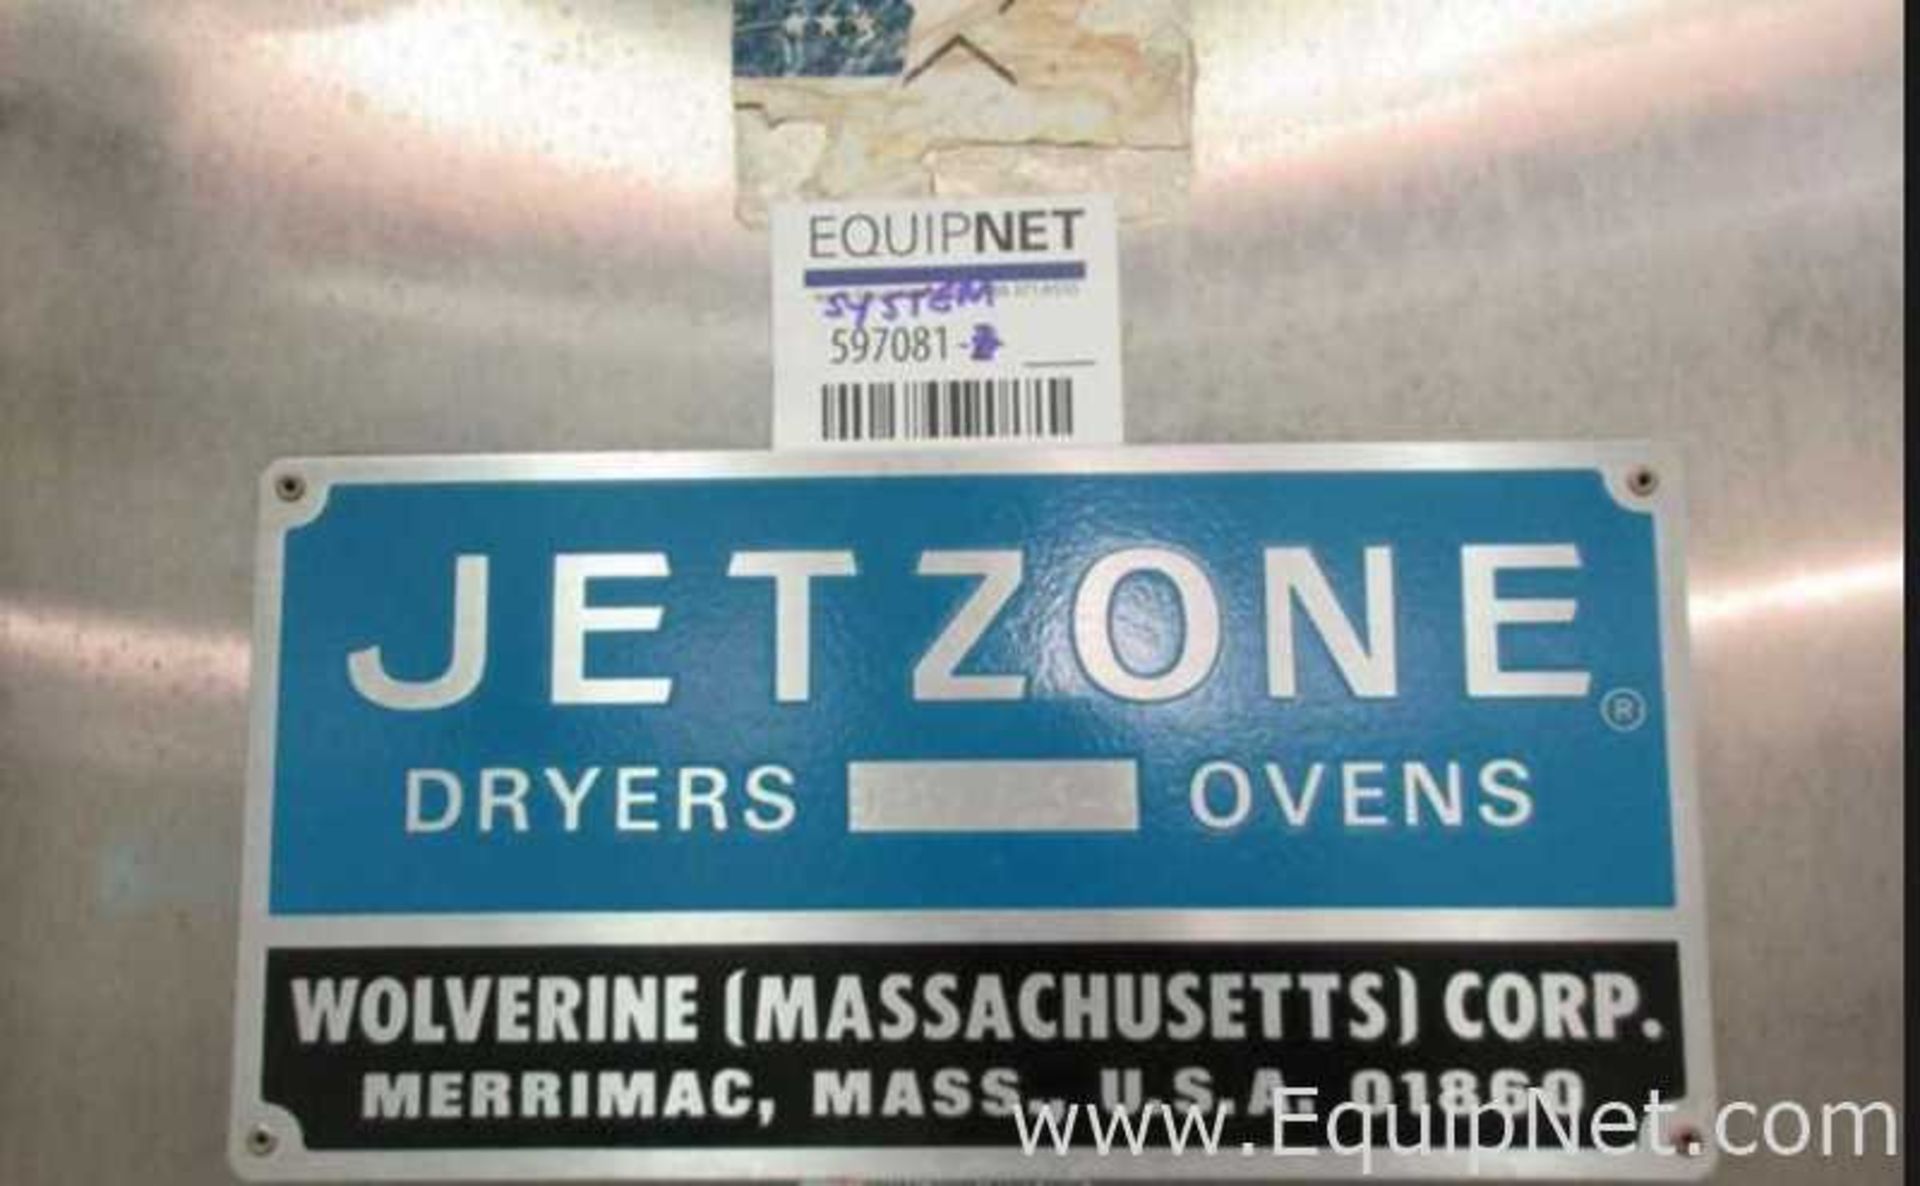 EQUIPNET LISTING #597081; REMOVAL COST: $0; DESCRIPTION: Wolverine Corporation Jet Zone Dryer - Image 17 of 18